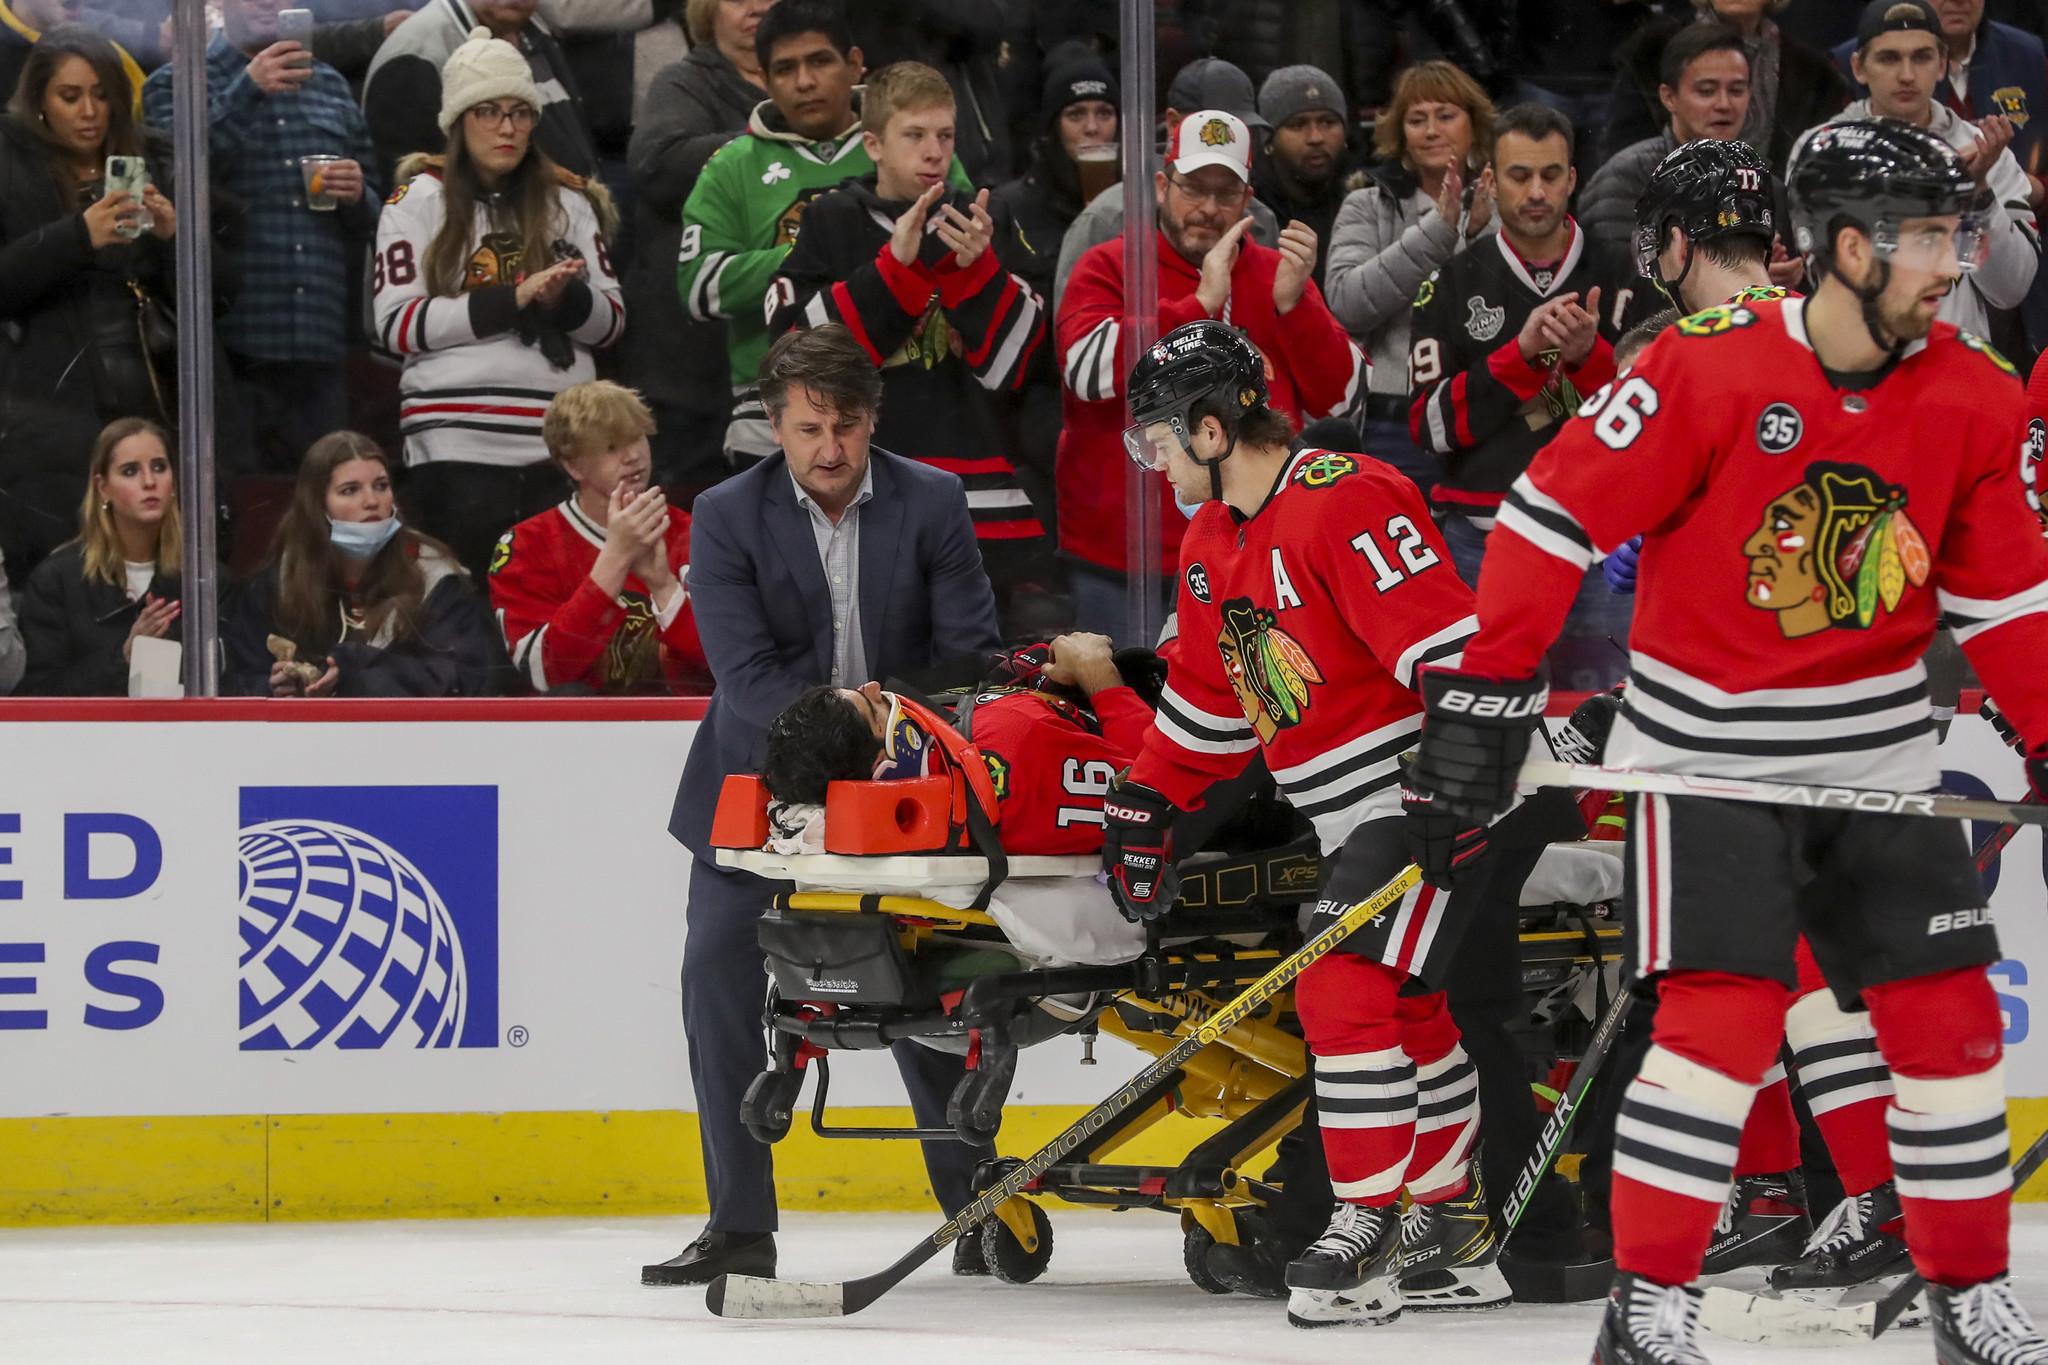 Blackhawks' Khaira released from hospital after scary hit